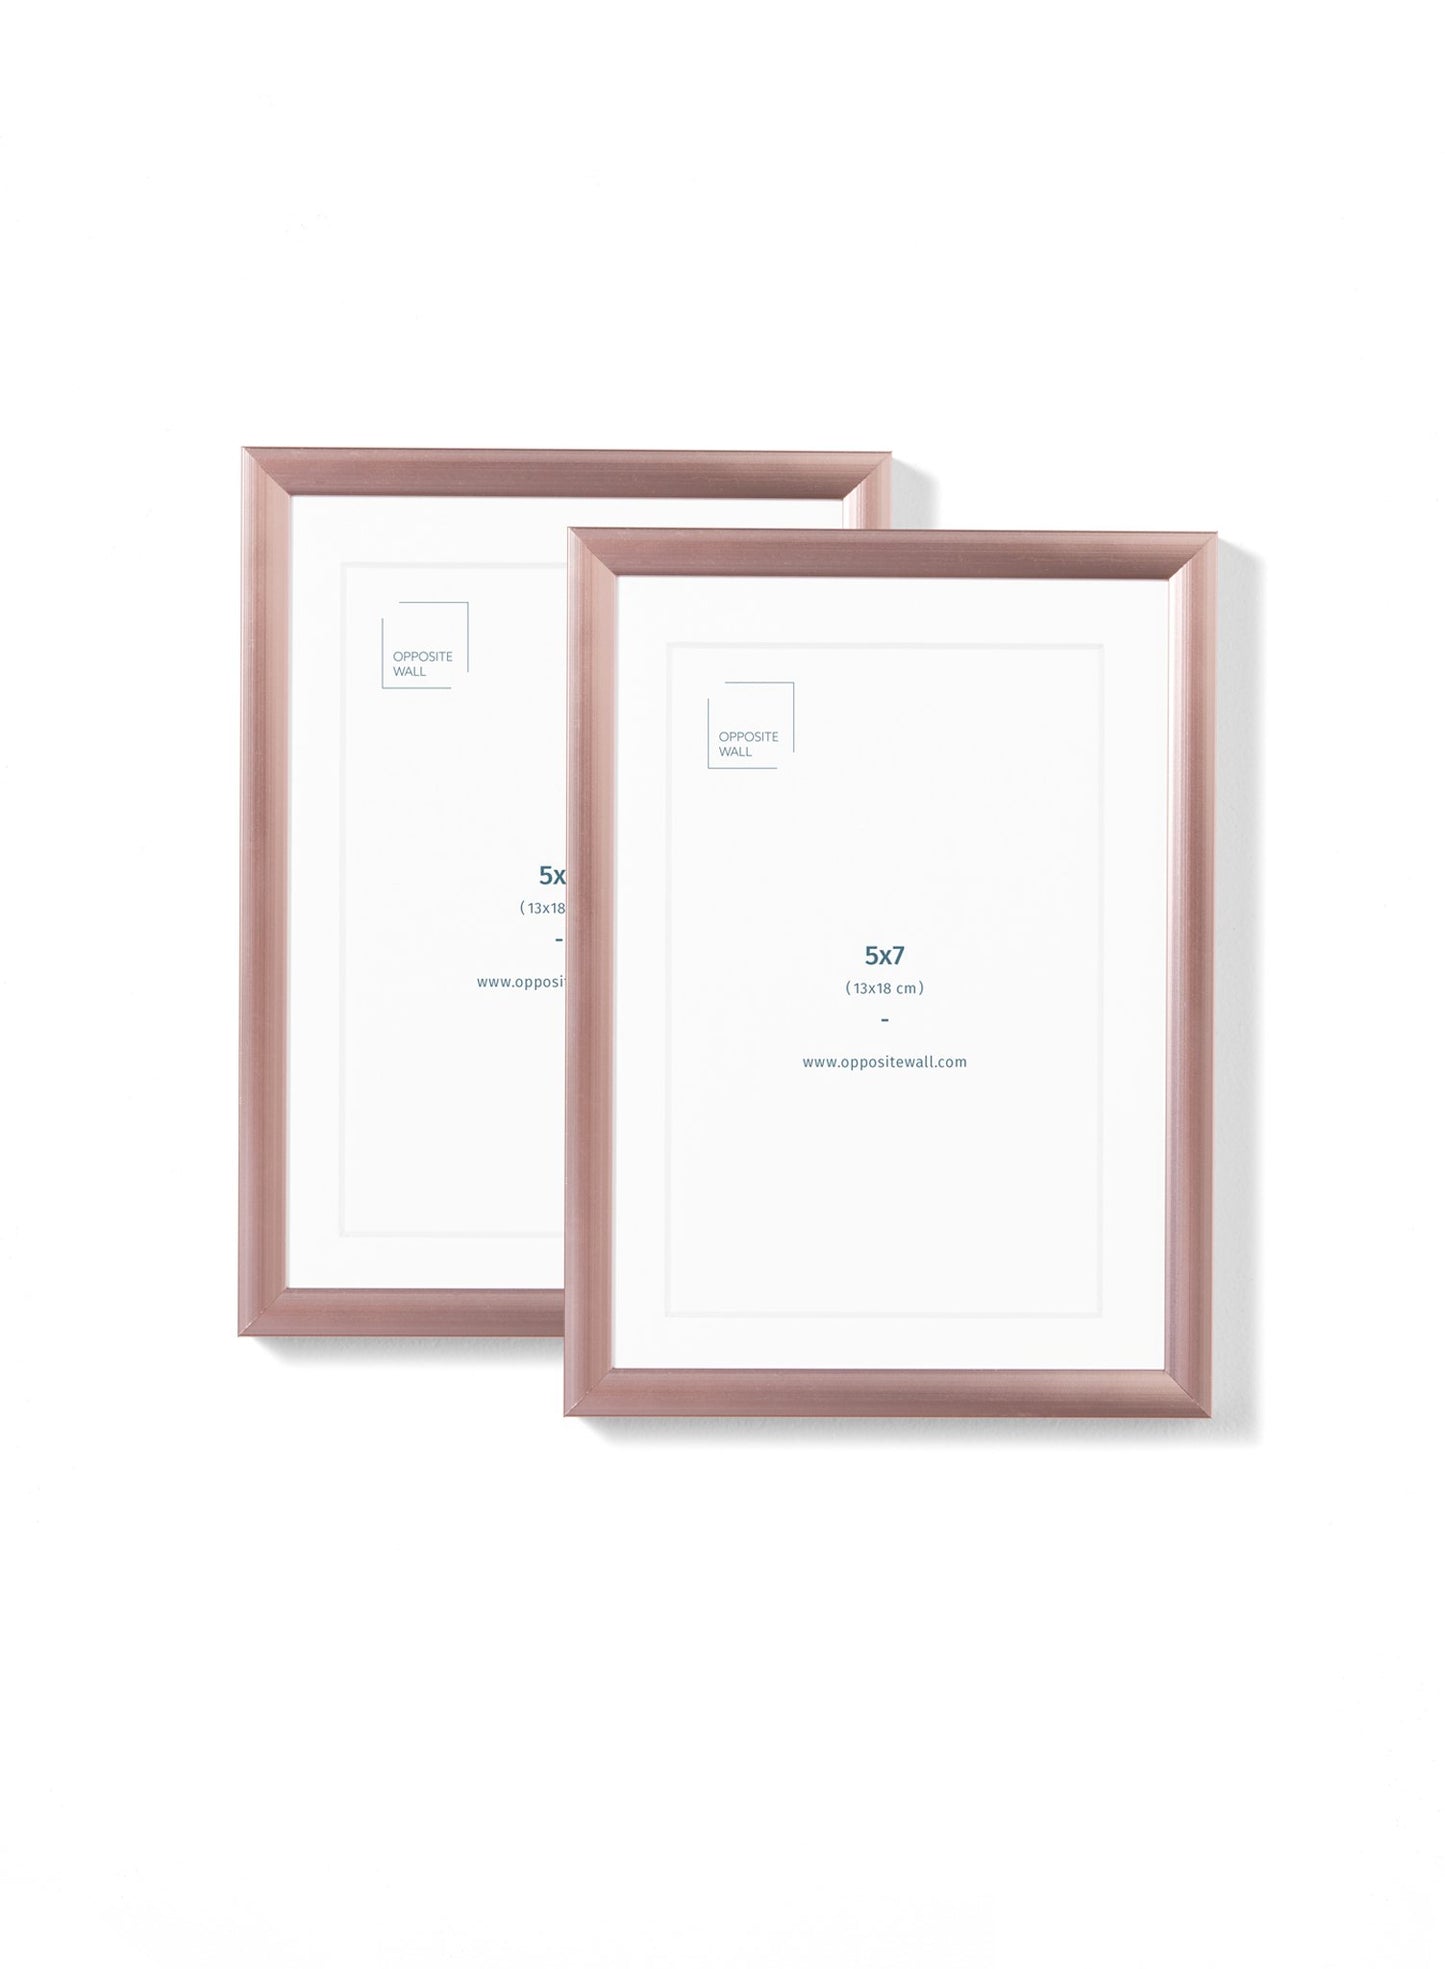 Scandinavian rose gold aluminum metal frame duo by Opposite Wall - Front of the frame - Size 5x7